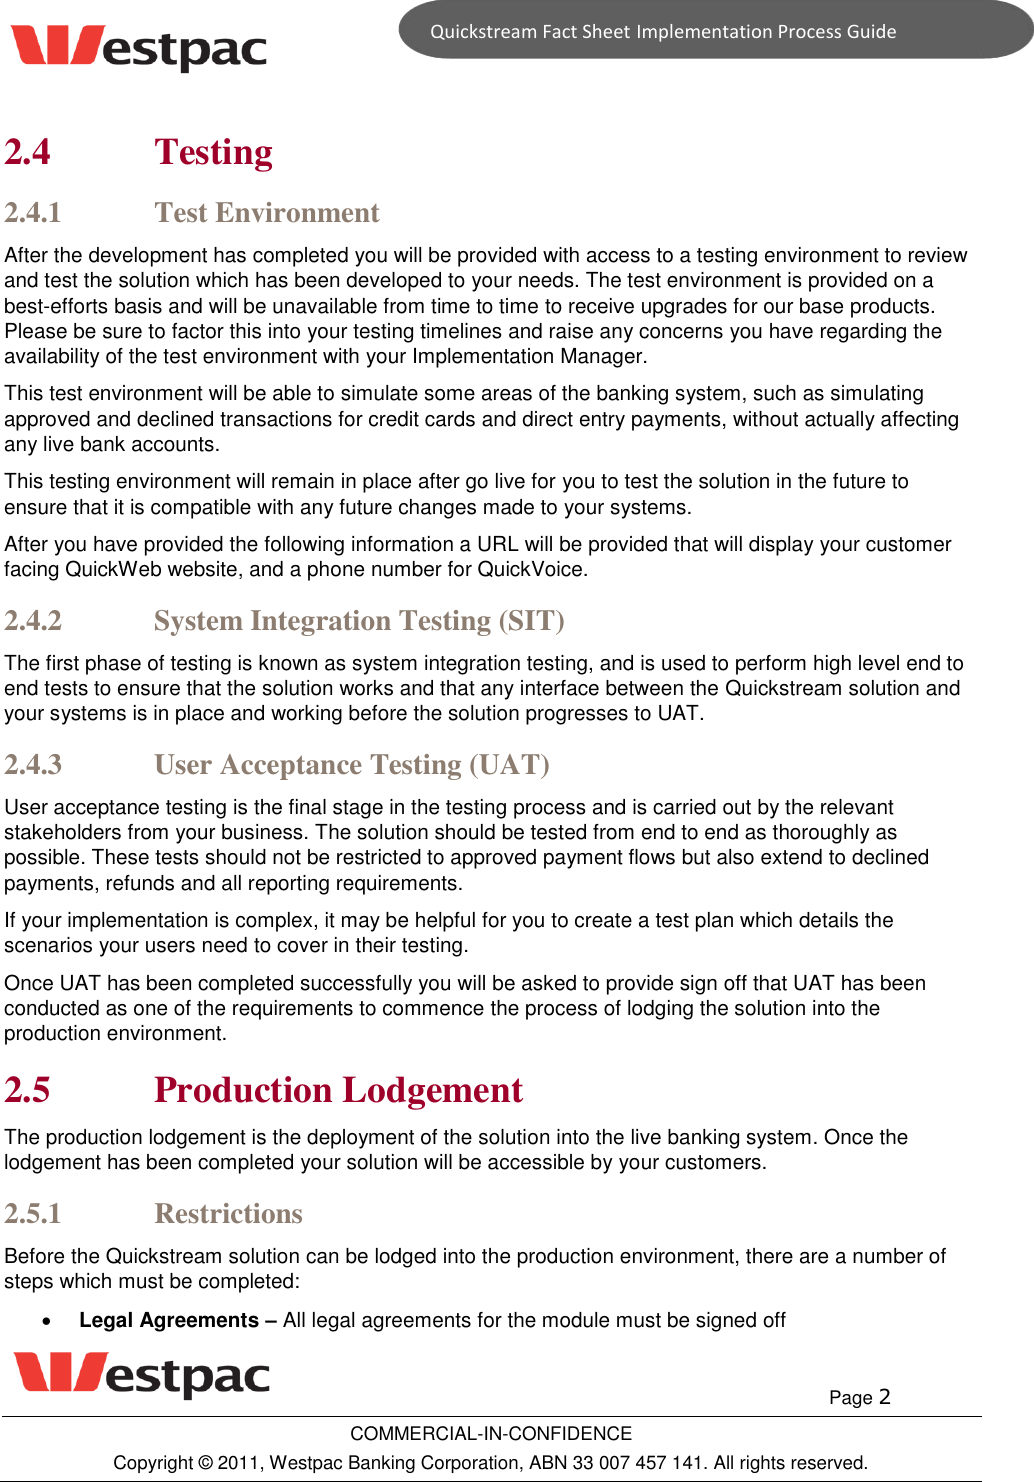 Page 2 of 3 - Quickstream Fact Sheet - Implementation Process Guide